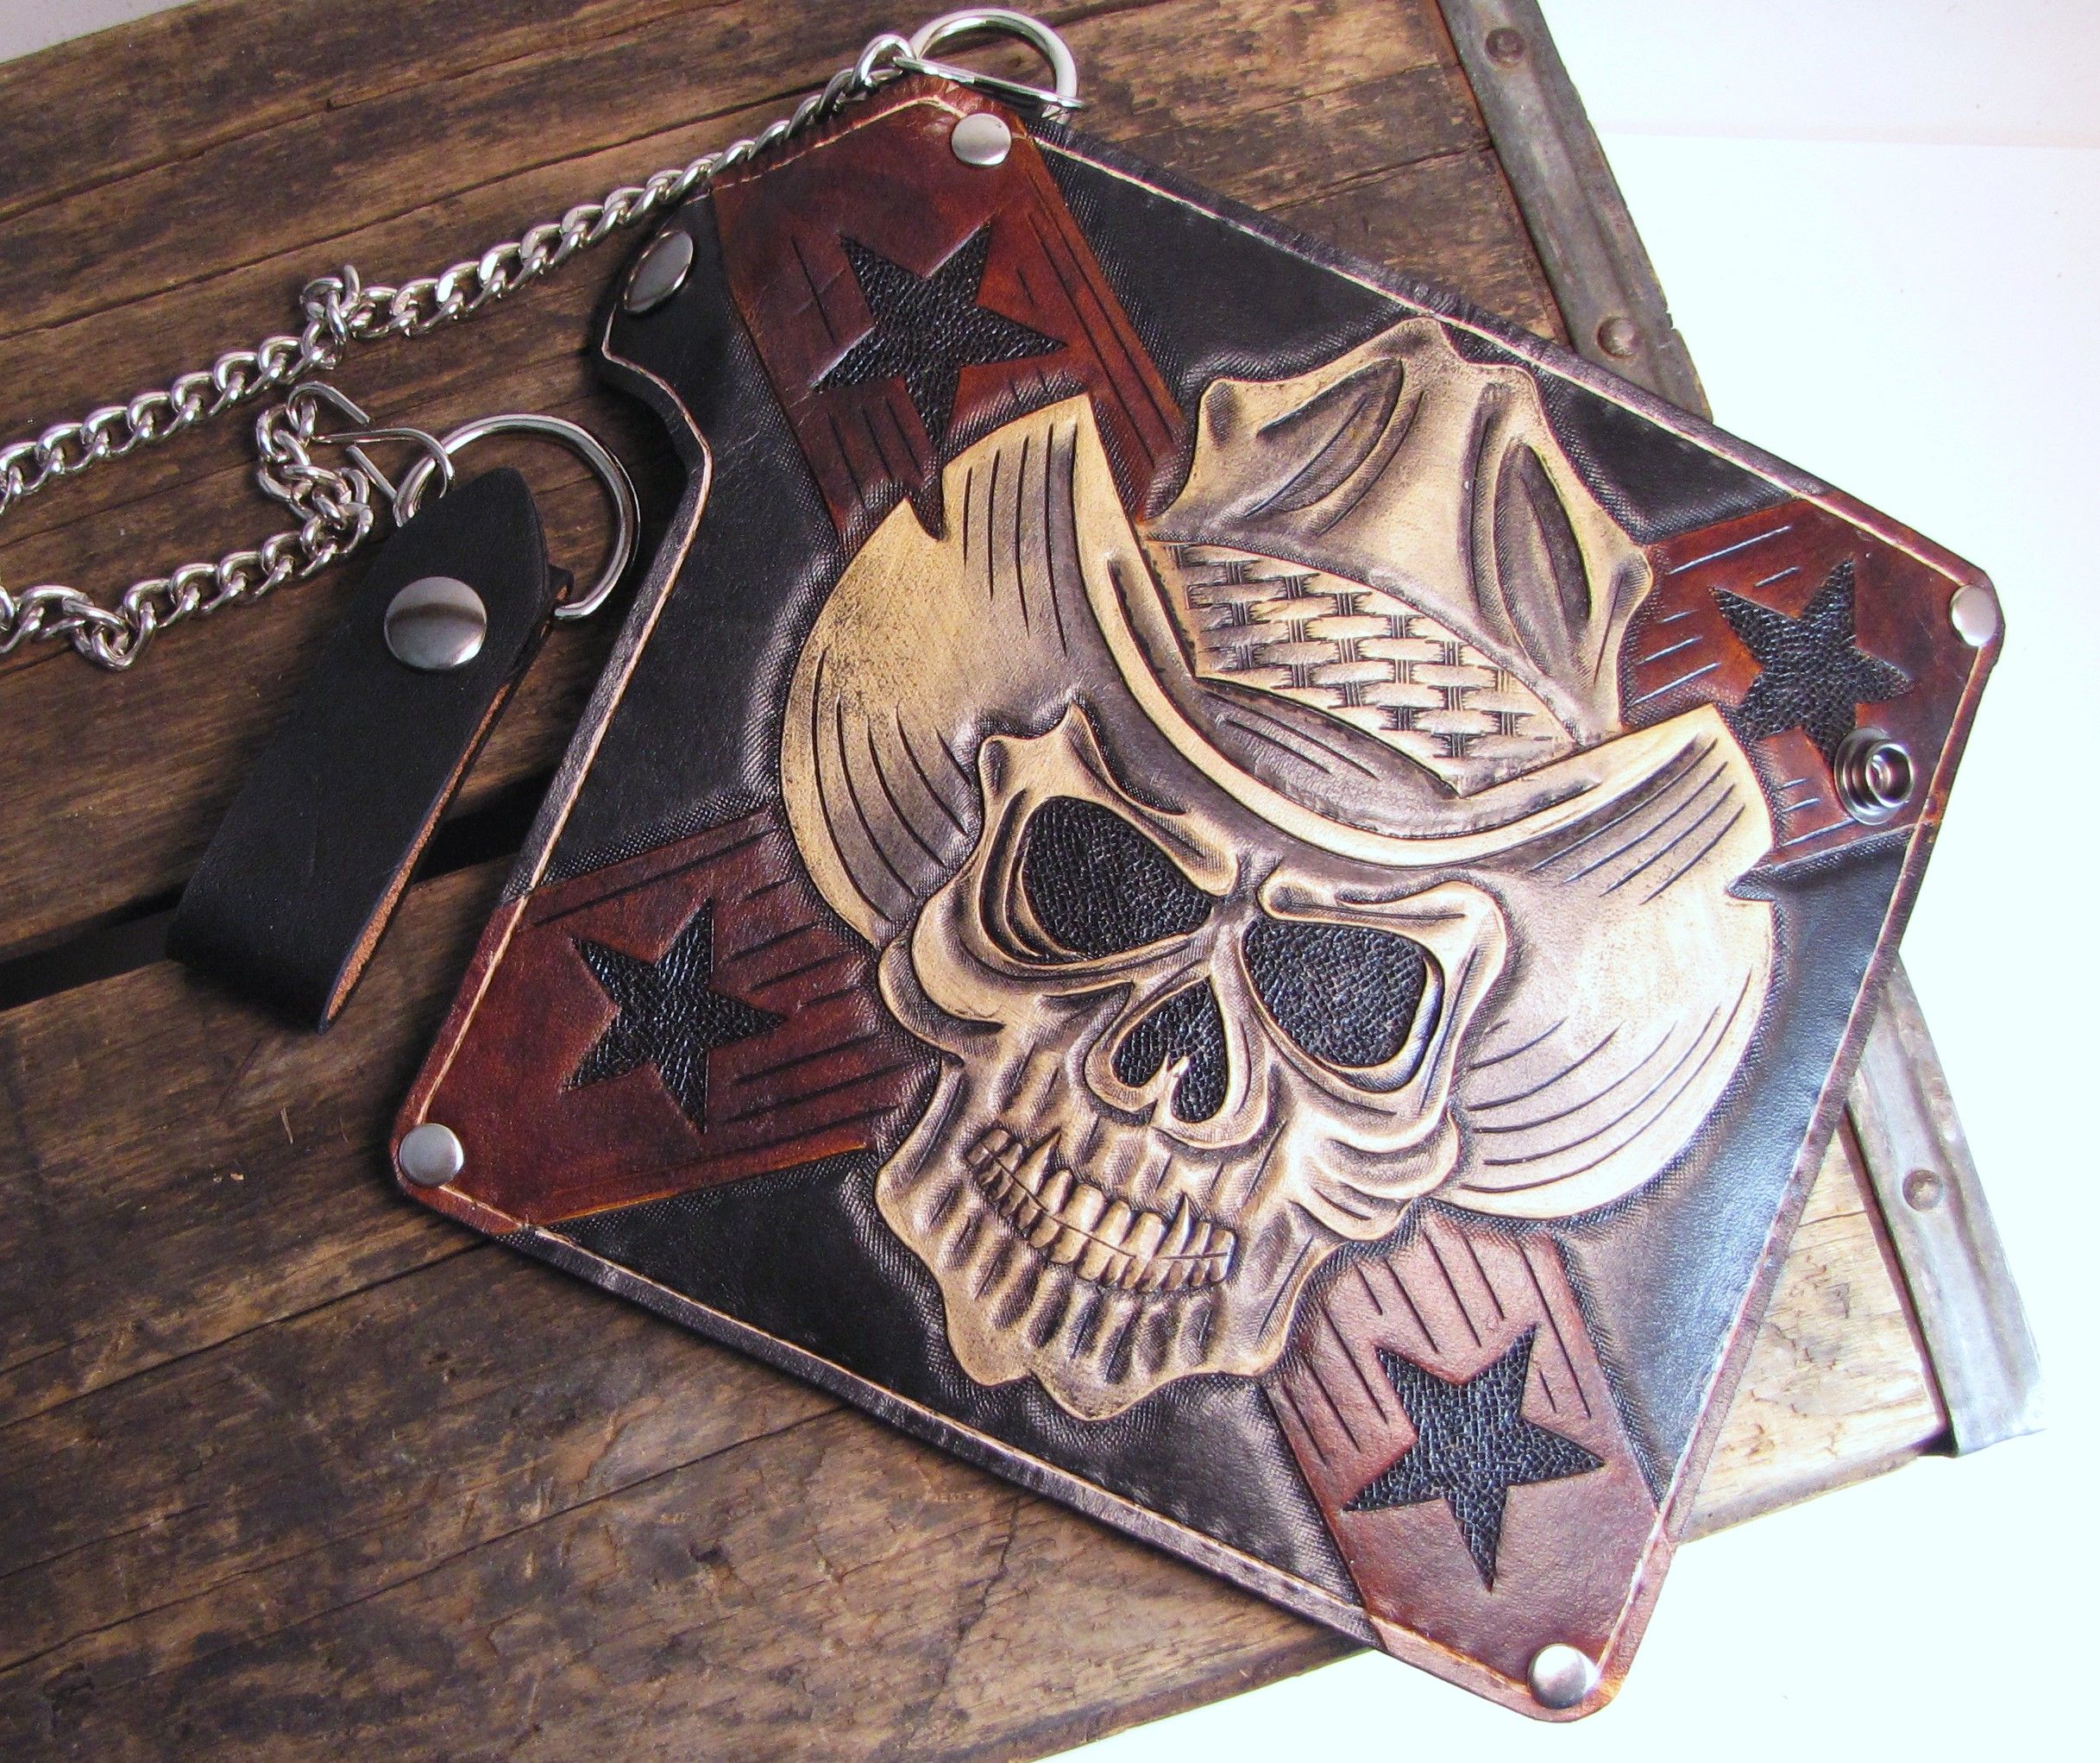 Buy a Hand Crafted Chain Wallet Cowboy Skull, (Tooled Leather,Skull,Hank 3,Biker,Trucker Wallet ...